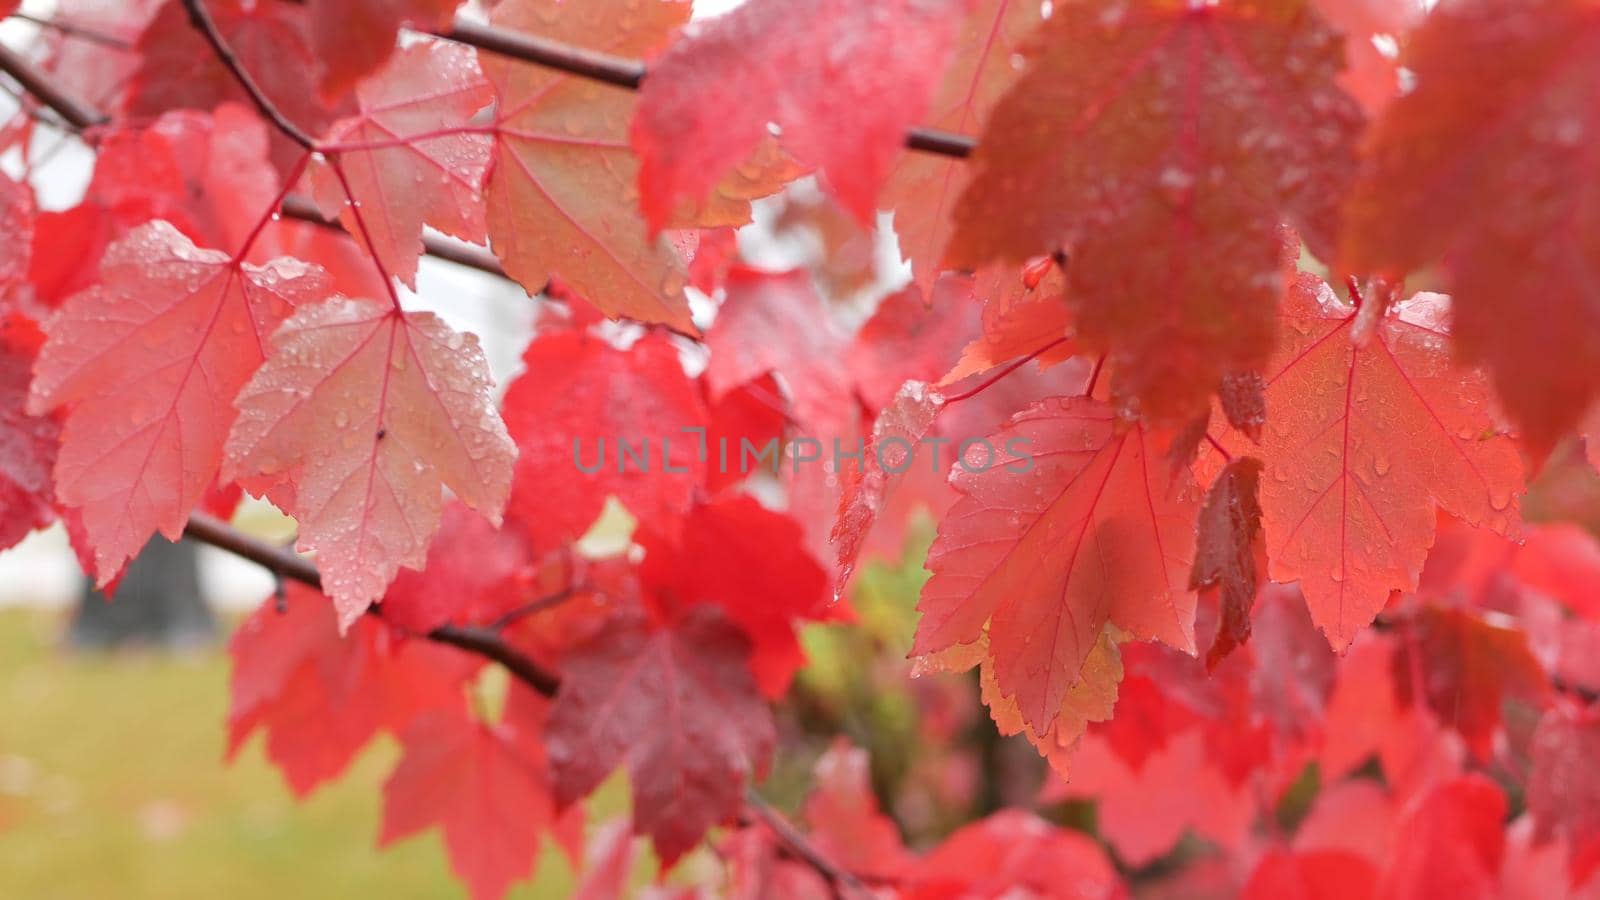 Rain drops on red autumn maple tree leaves. Water droplets, wet fall leaf in forest or woods. September, october or november weather. Leafage in moist park . Seasonal foliage on plant branch.